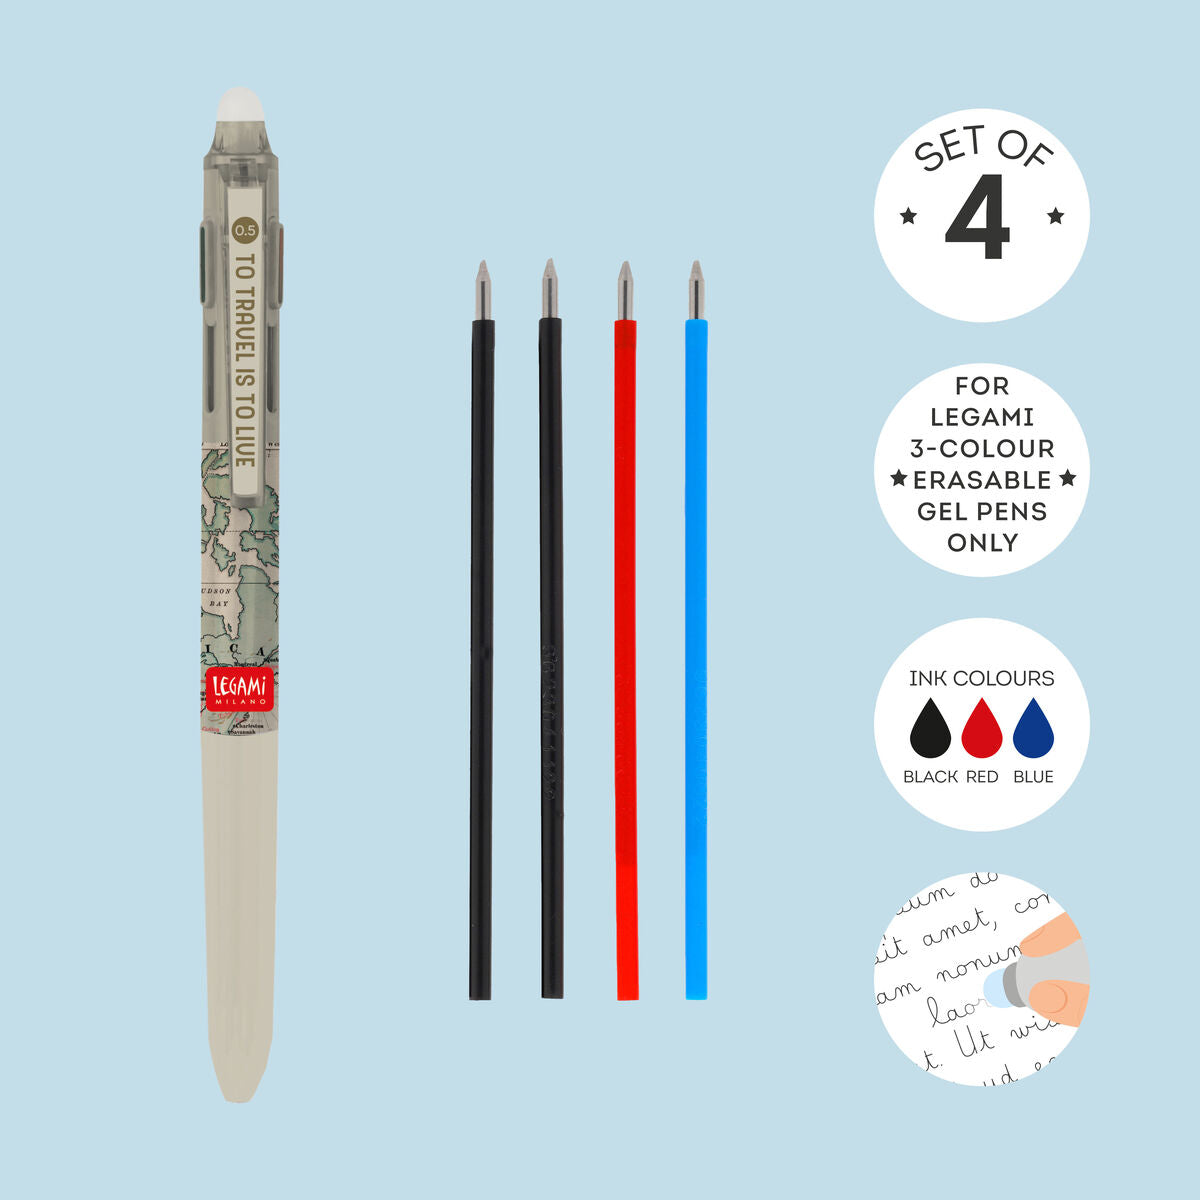 Back to School | Legami Gel Pen 3 Colours Refills 4Pk by Weirs of Baggot Street